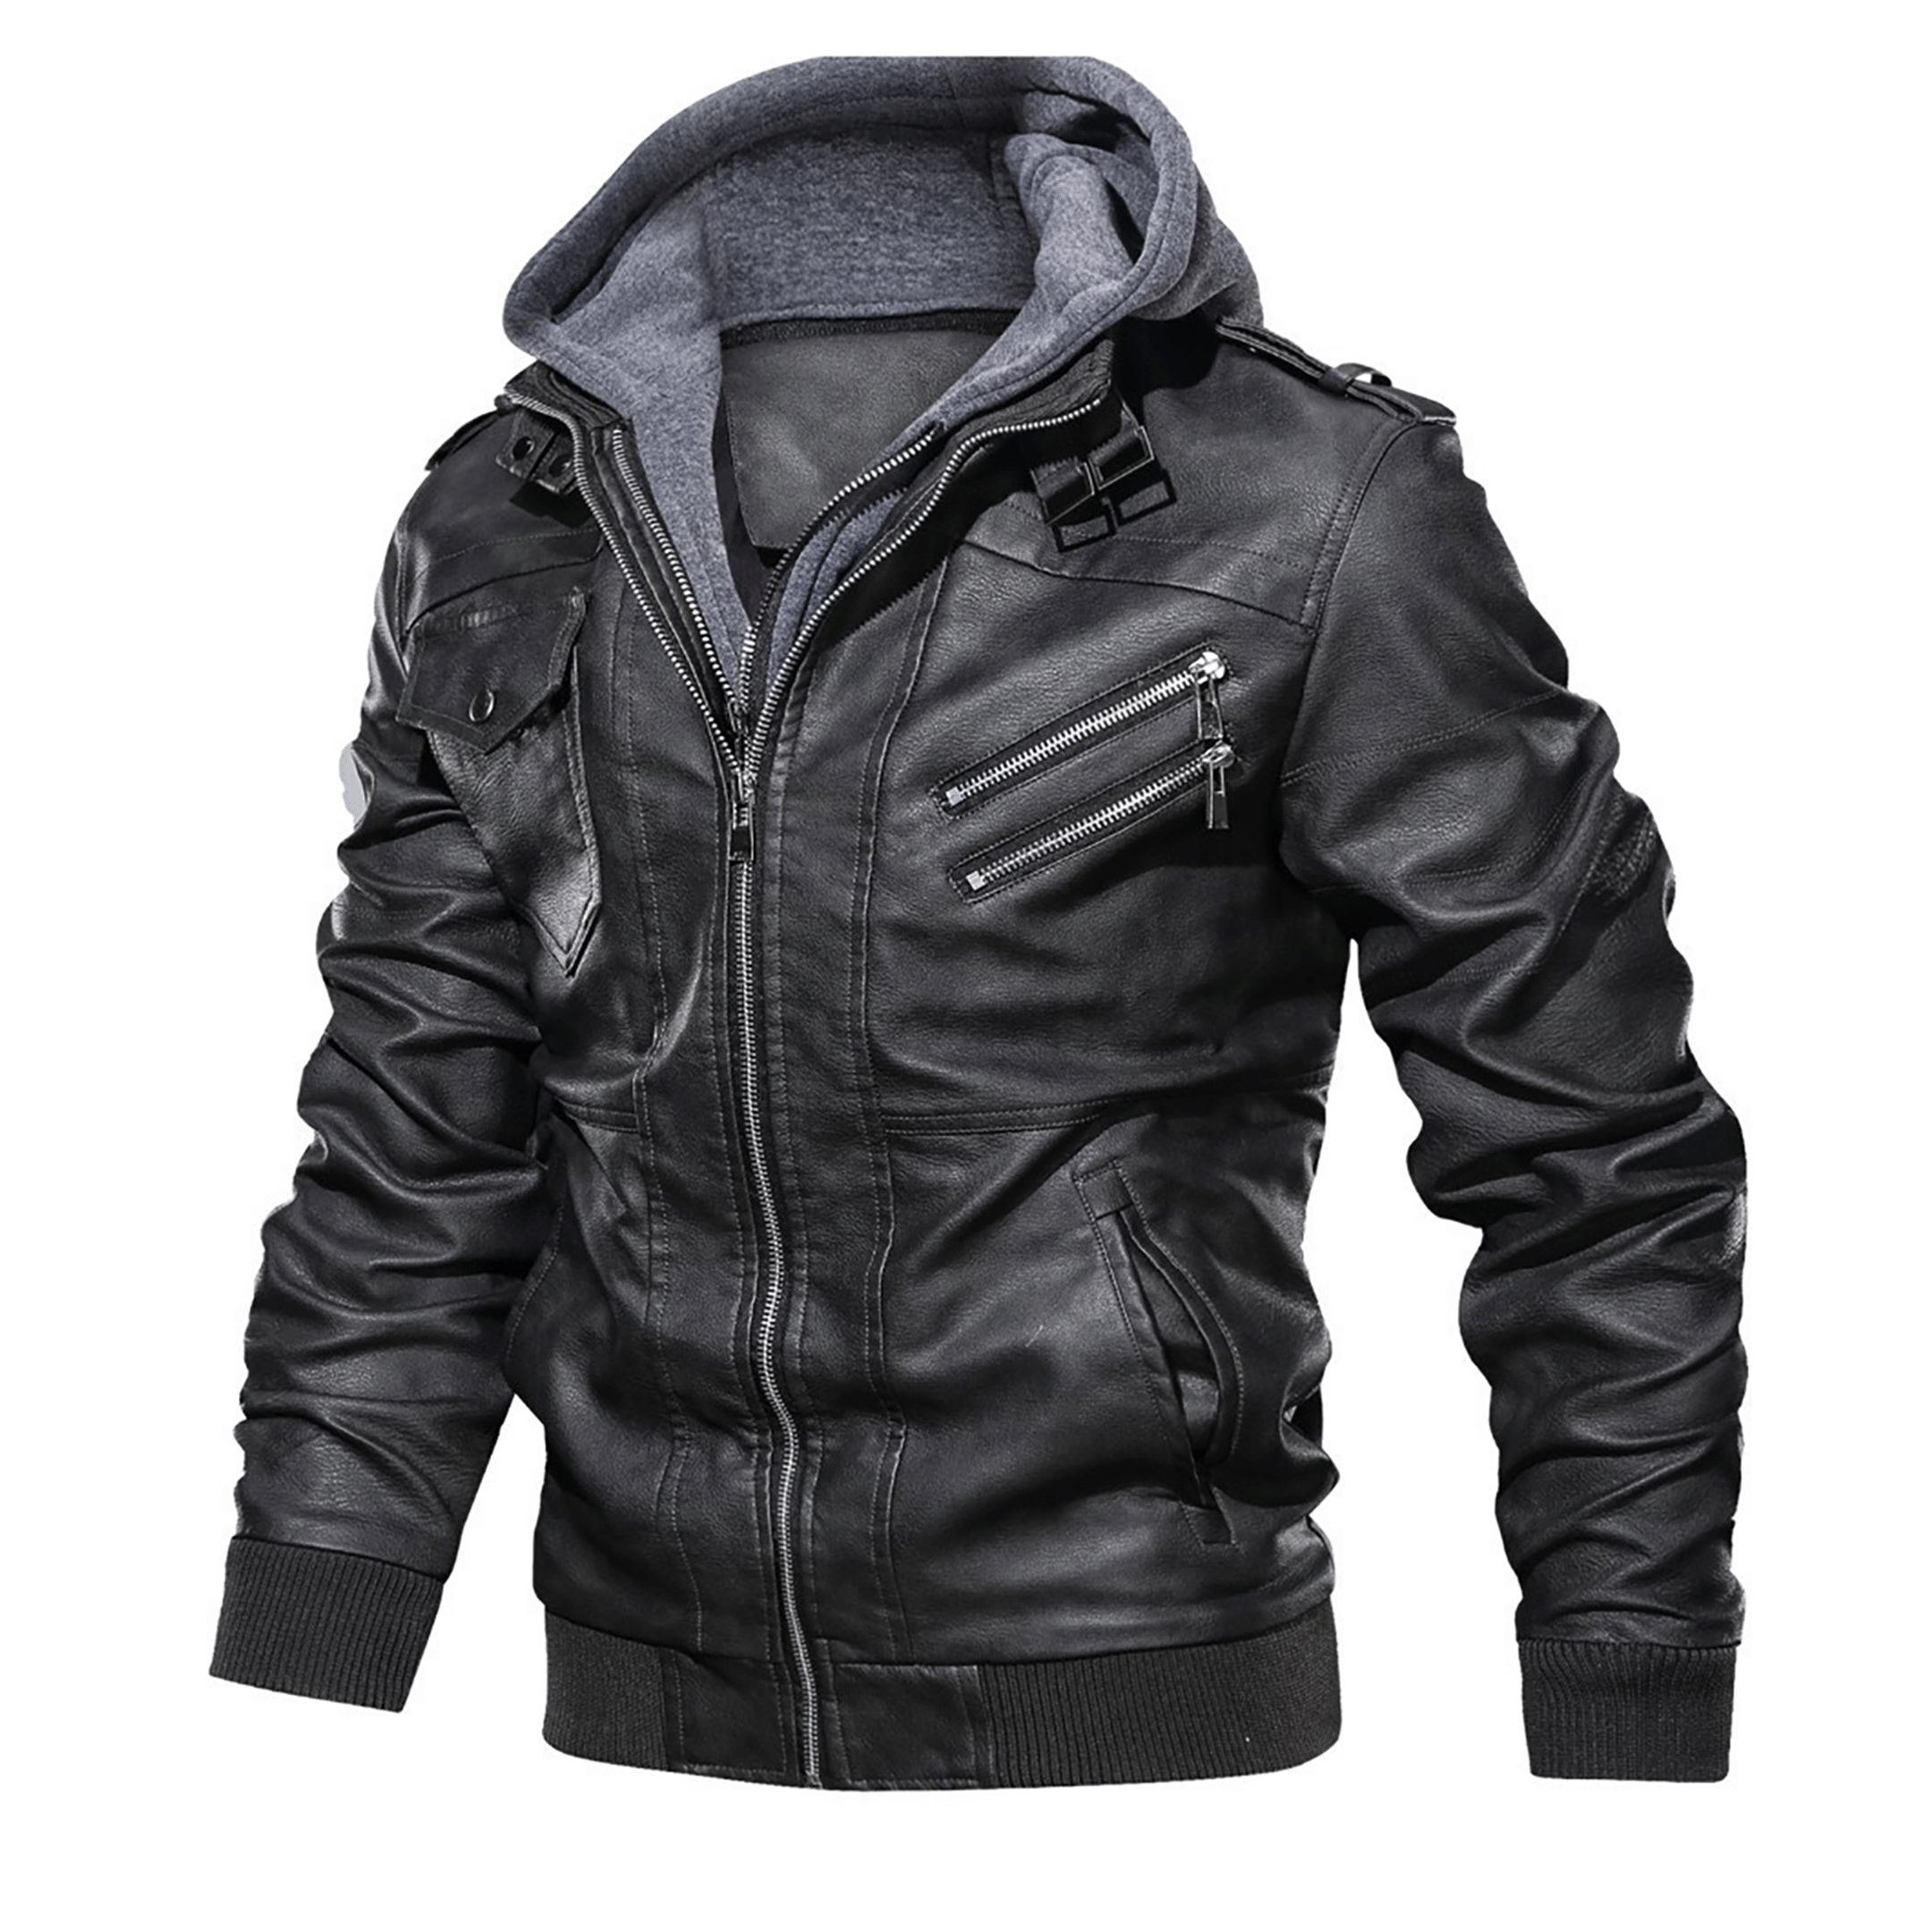 Top leather jackets and latest products 263